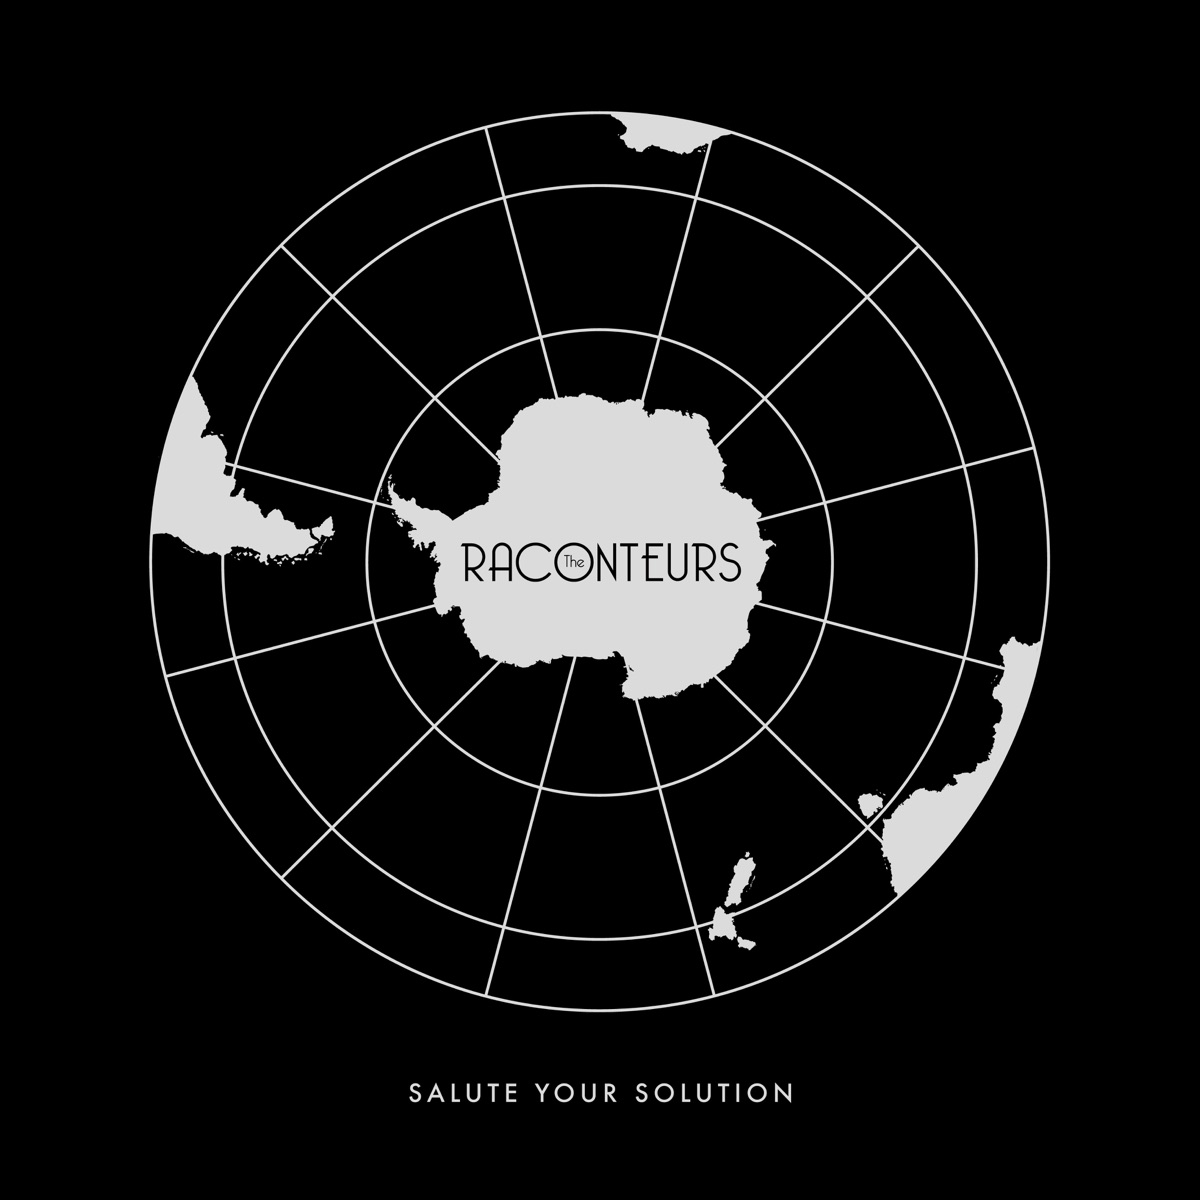 The Raconteurs — Salute Your Solution cover artwork